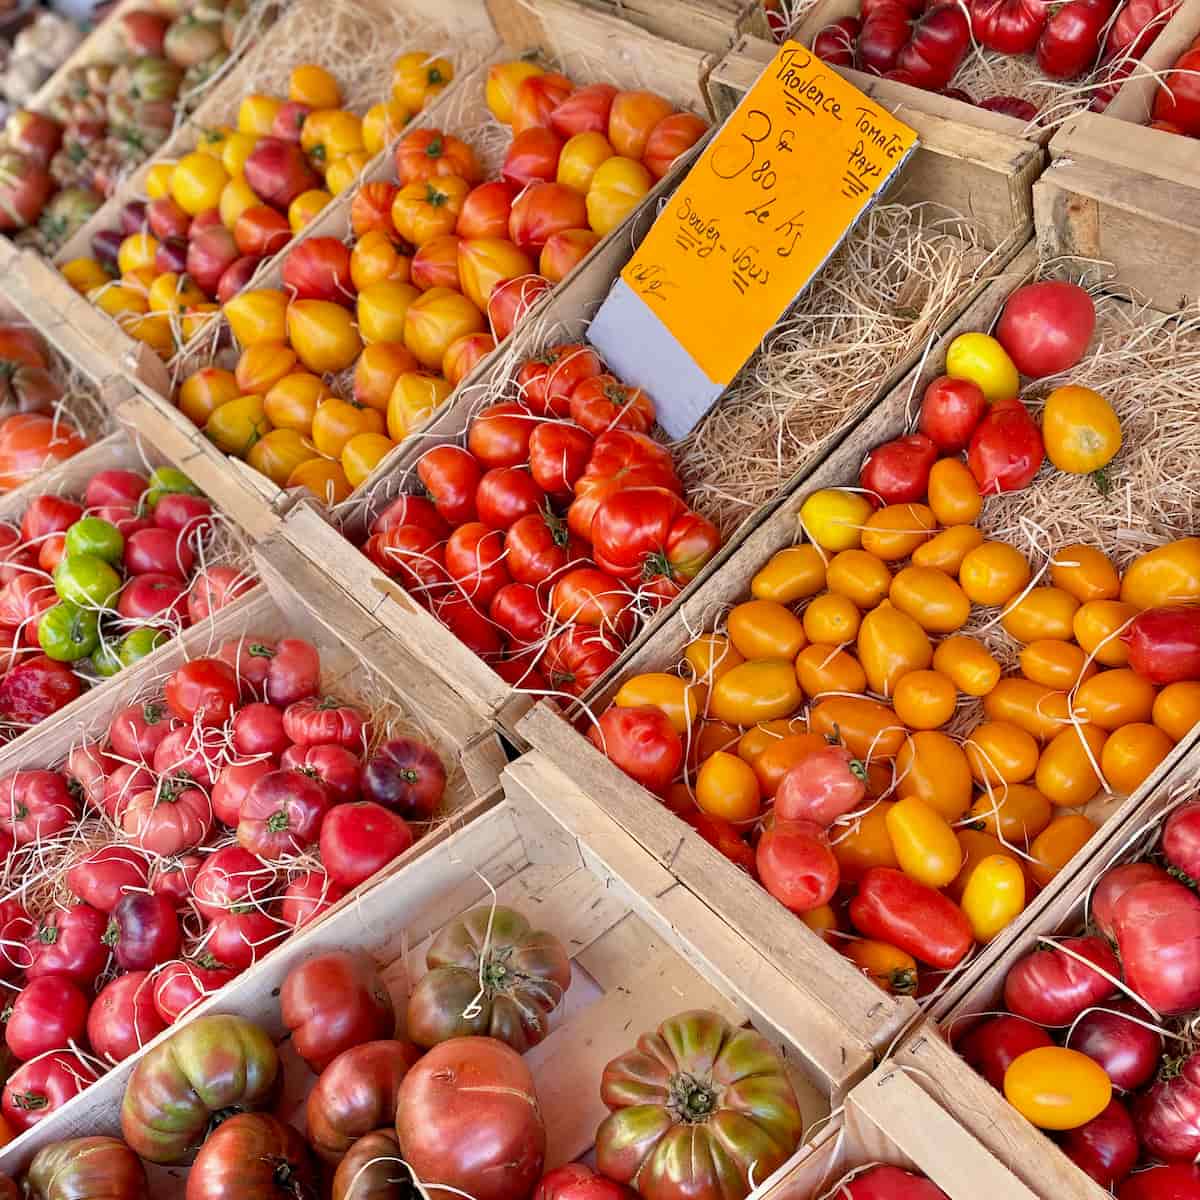 crates of fresh tomatoes in different sizes and colour from red, yellow to green in a Provencal market